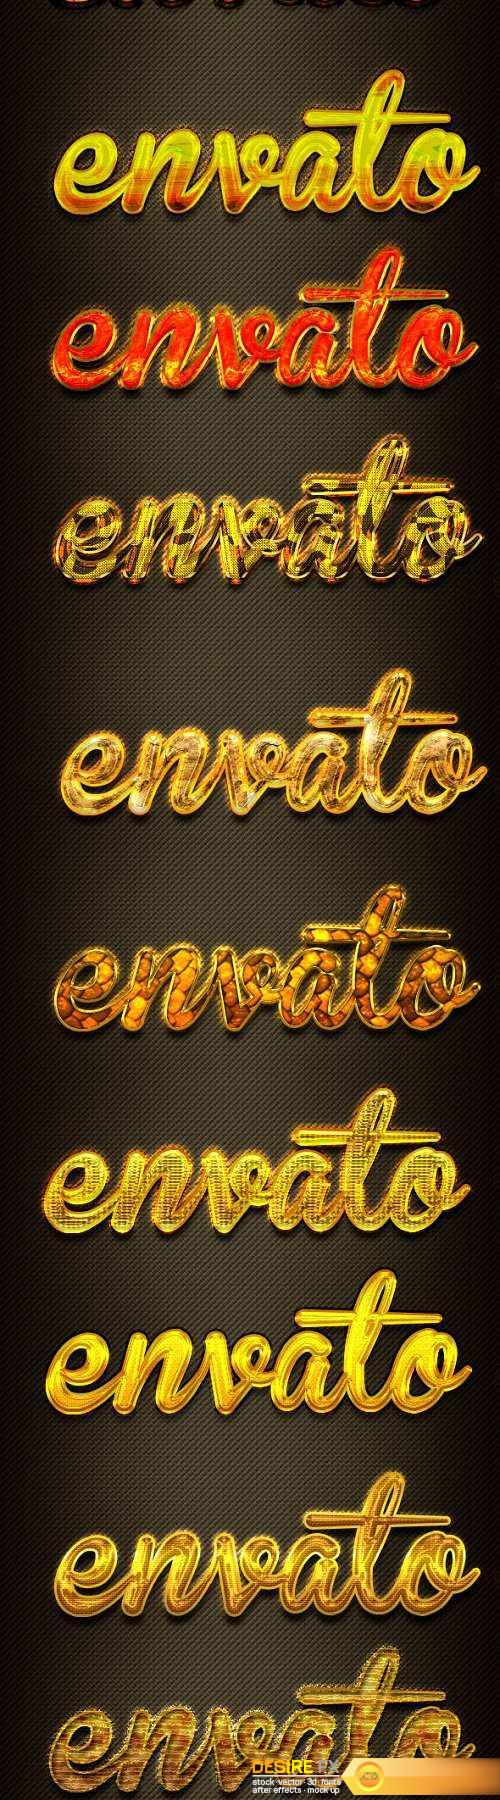 12 Photoshop GOLD Text Effect Styles Vol 26 20167018